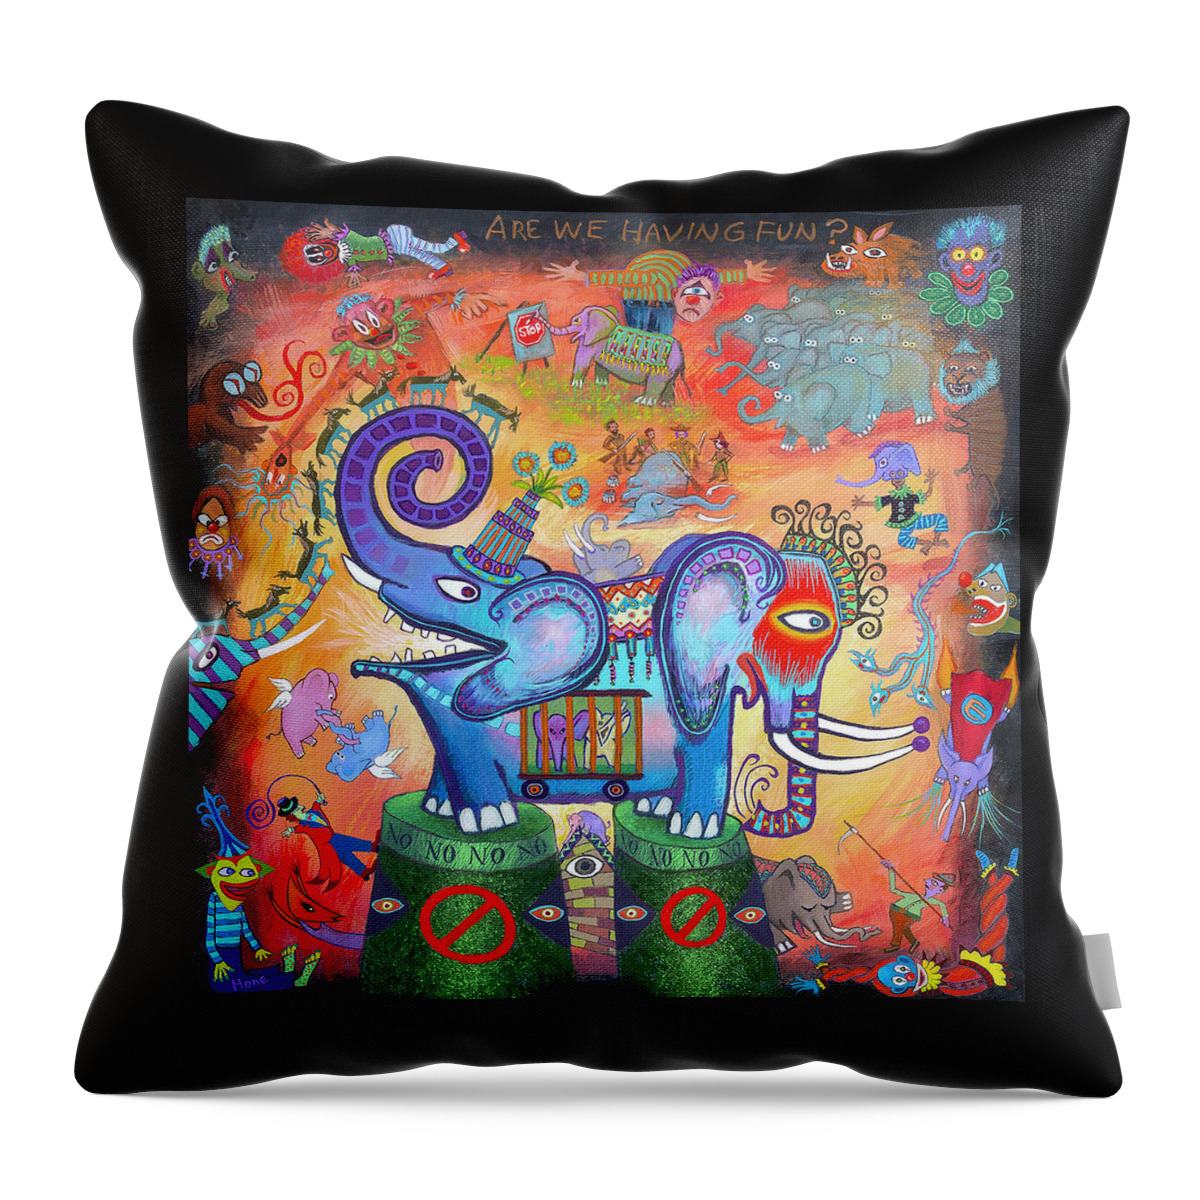  Throw Pillow featuring the painting Are We Having Fun by Hone Williams